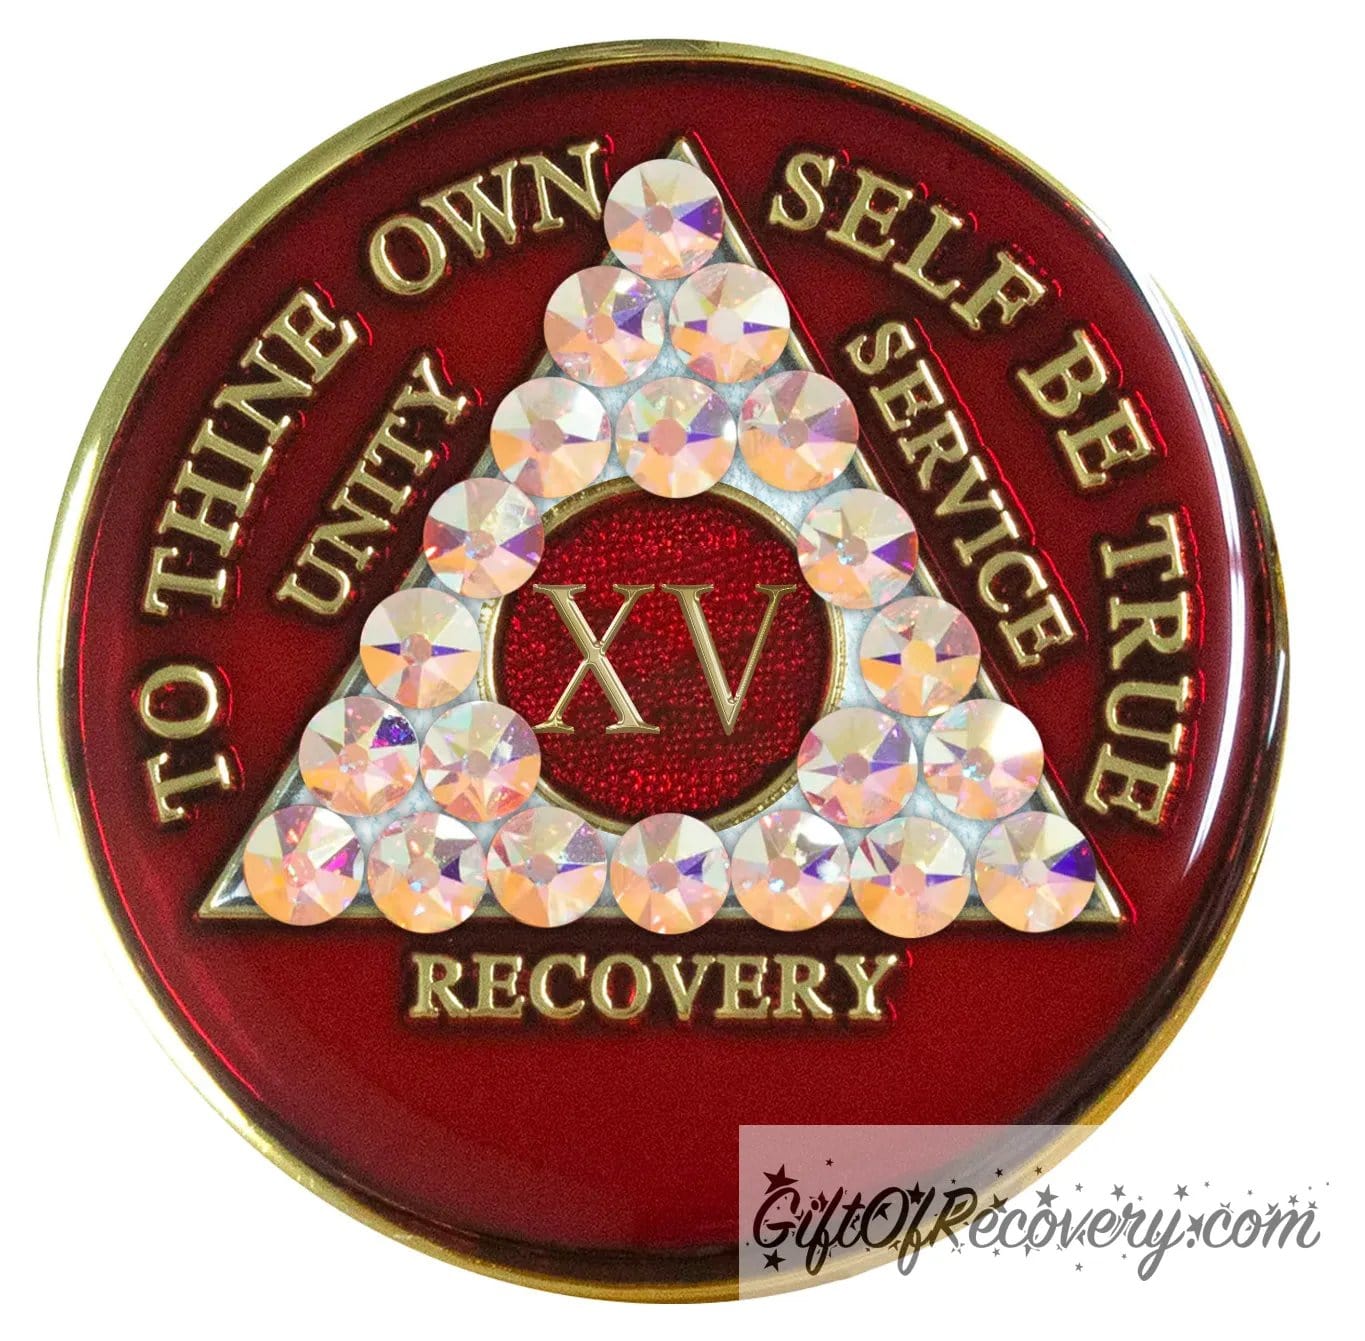 15 year AA medallion ruby red with 21 Aurora Borealis genuine crystals in the shape of the triangle and to thine own self be true, unity, service, recovery, and roman numeral are embossed with 14k gold-plated brass, the medallion is sealed with resin for a shiny finish that lasts.